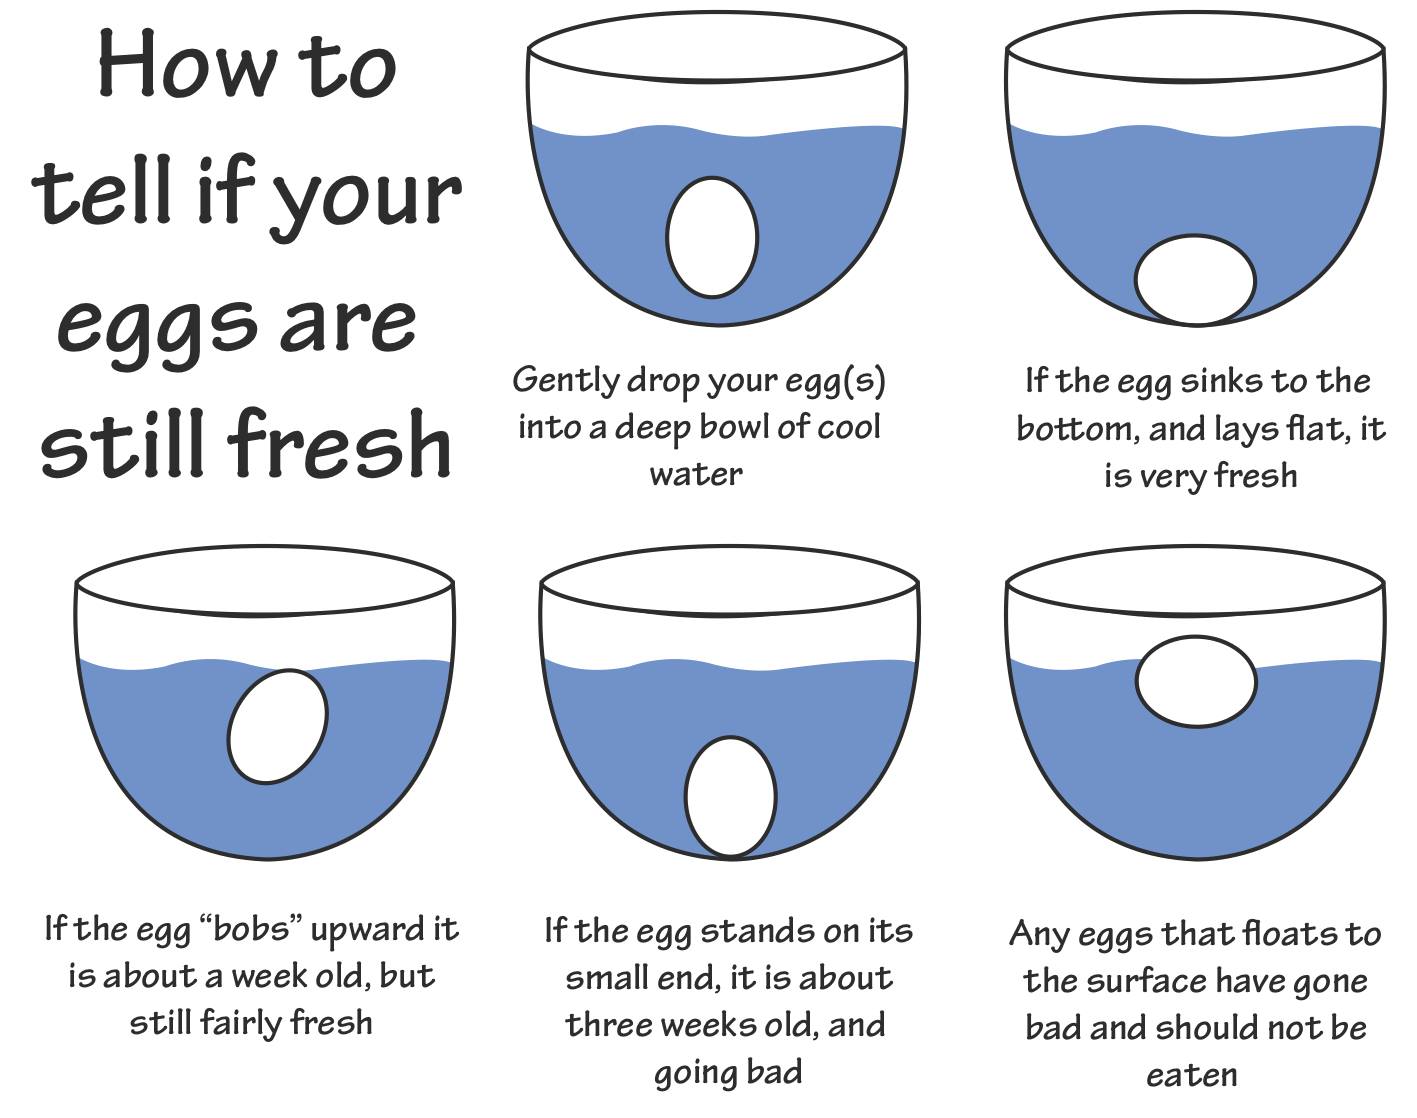 How To Tell If Your Eggs Are Still Fresh - Food - Nigeria